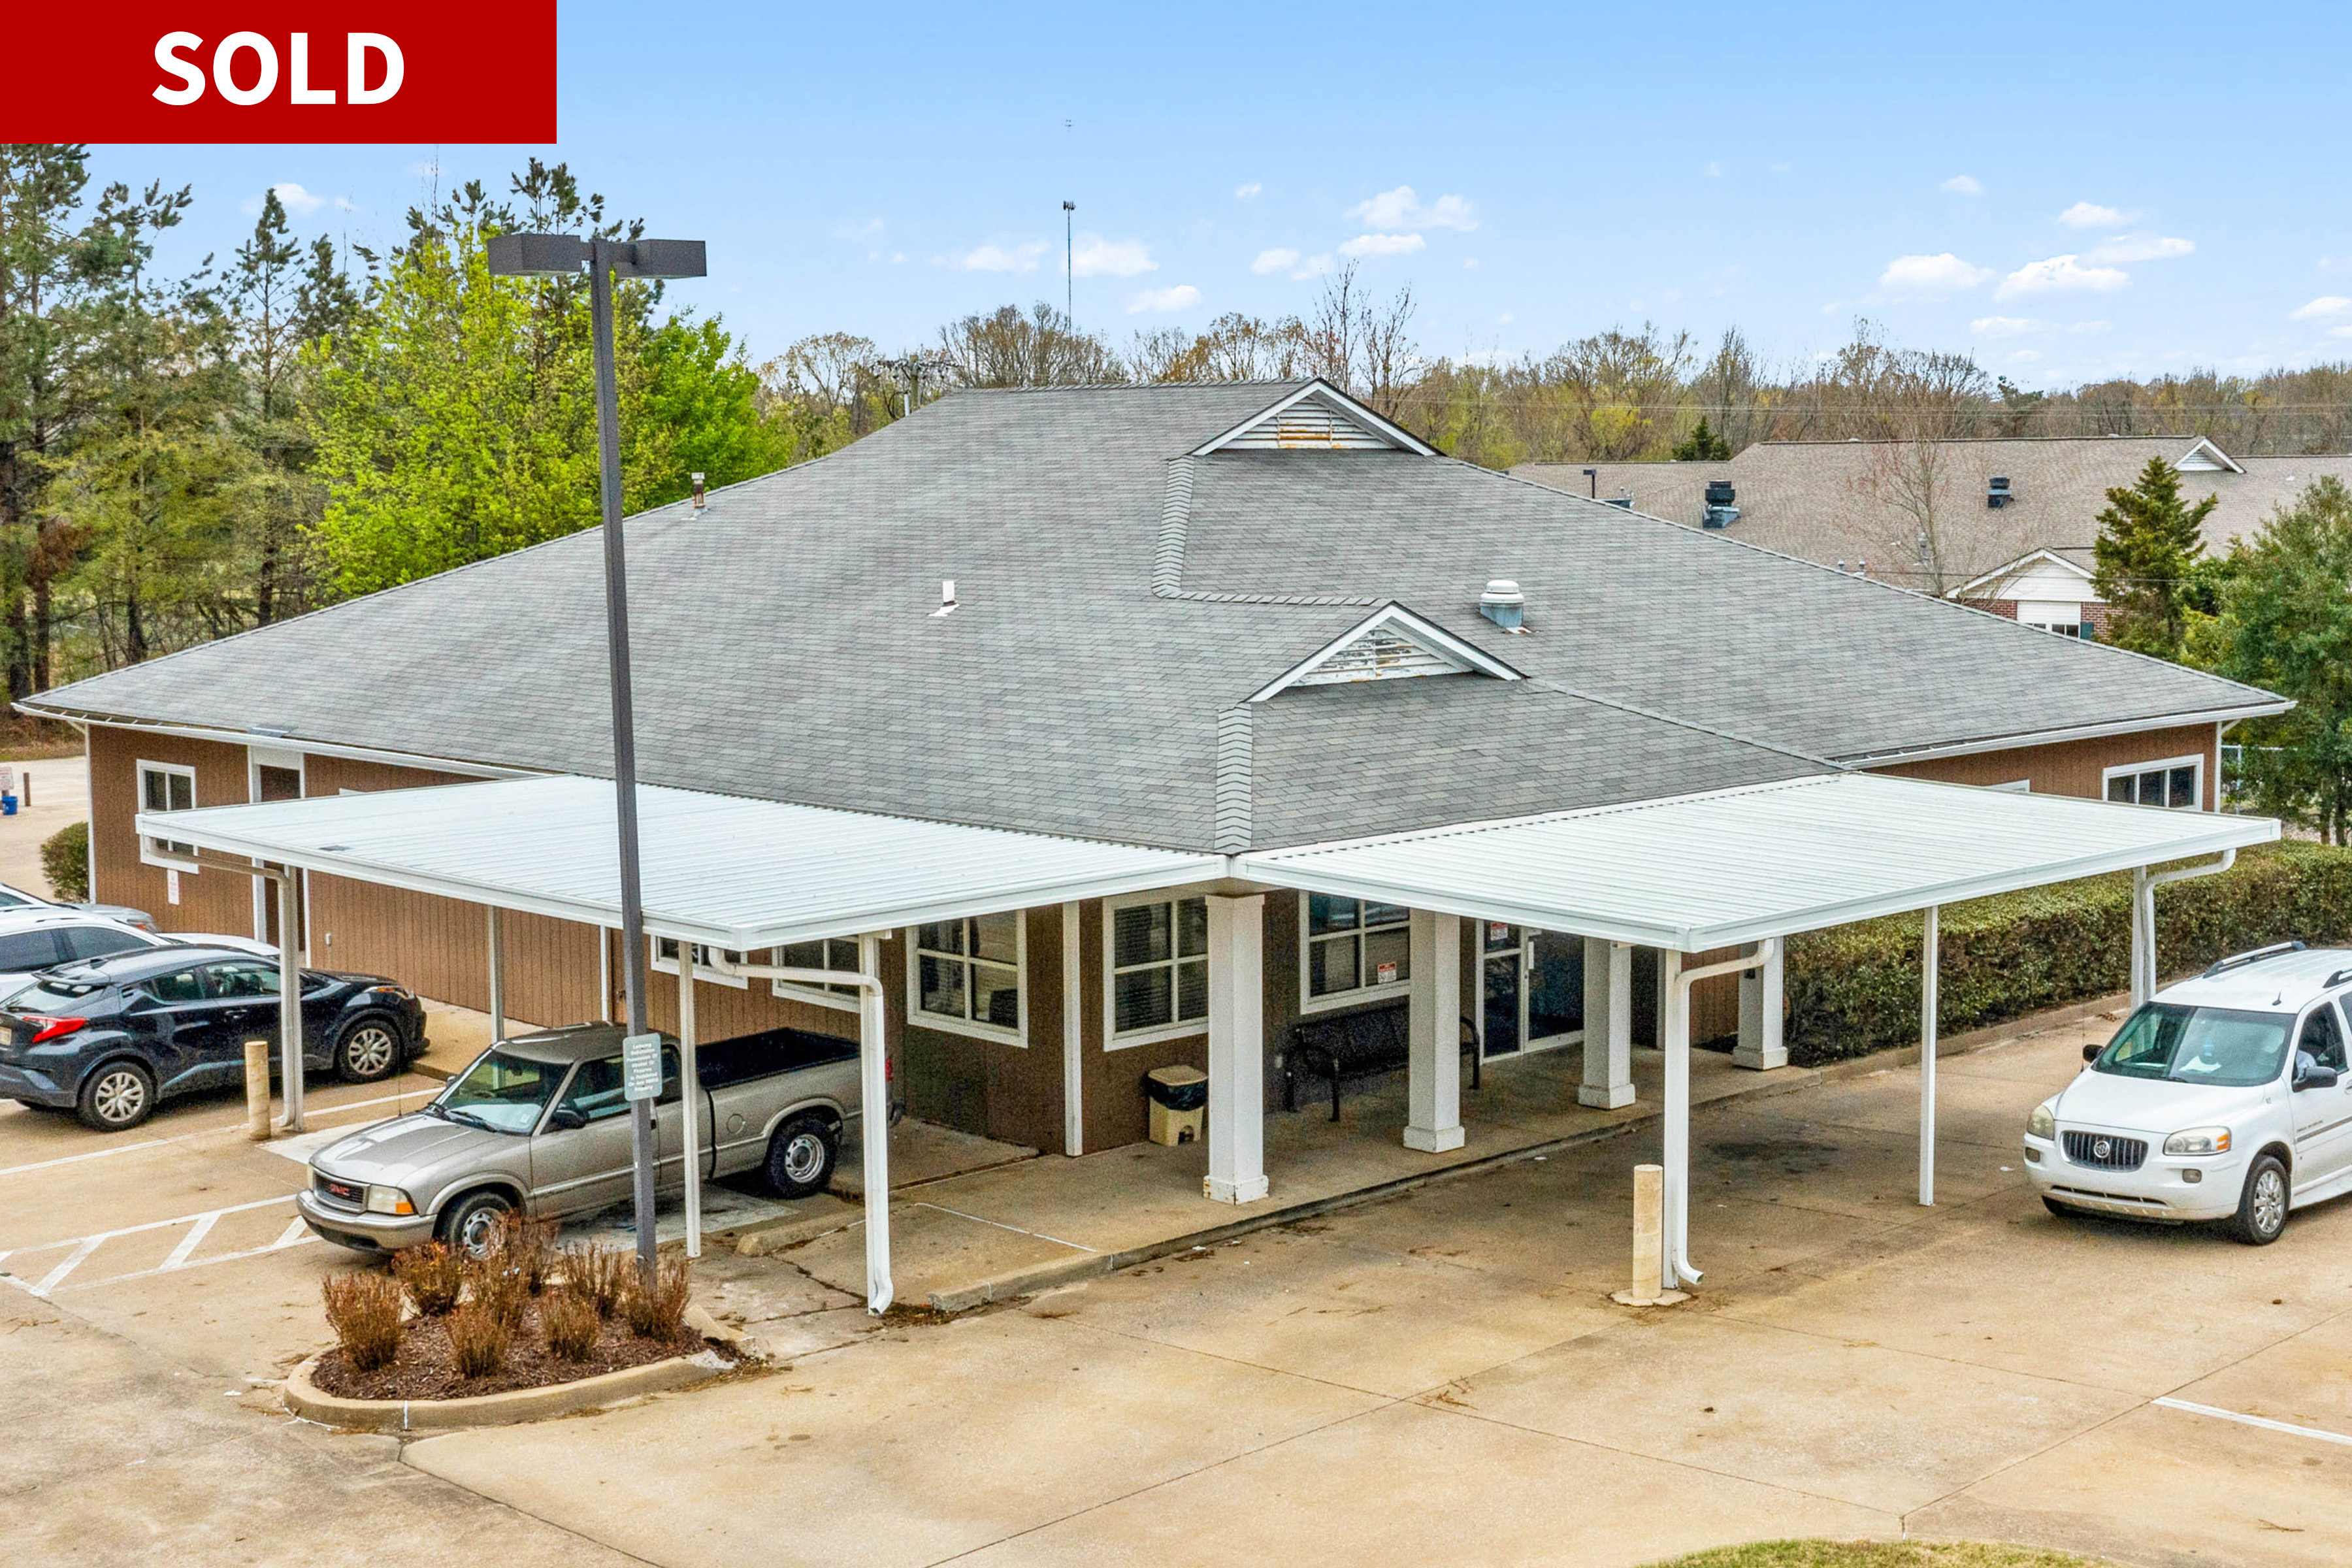 sold-fresenius-holly-springs-ms